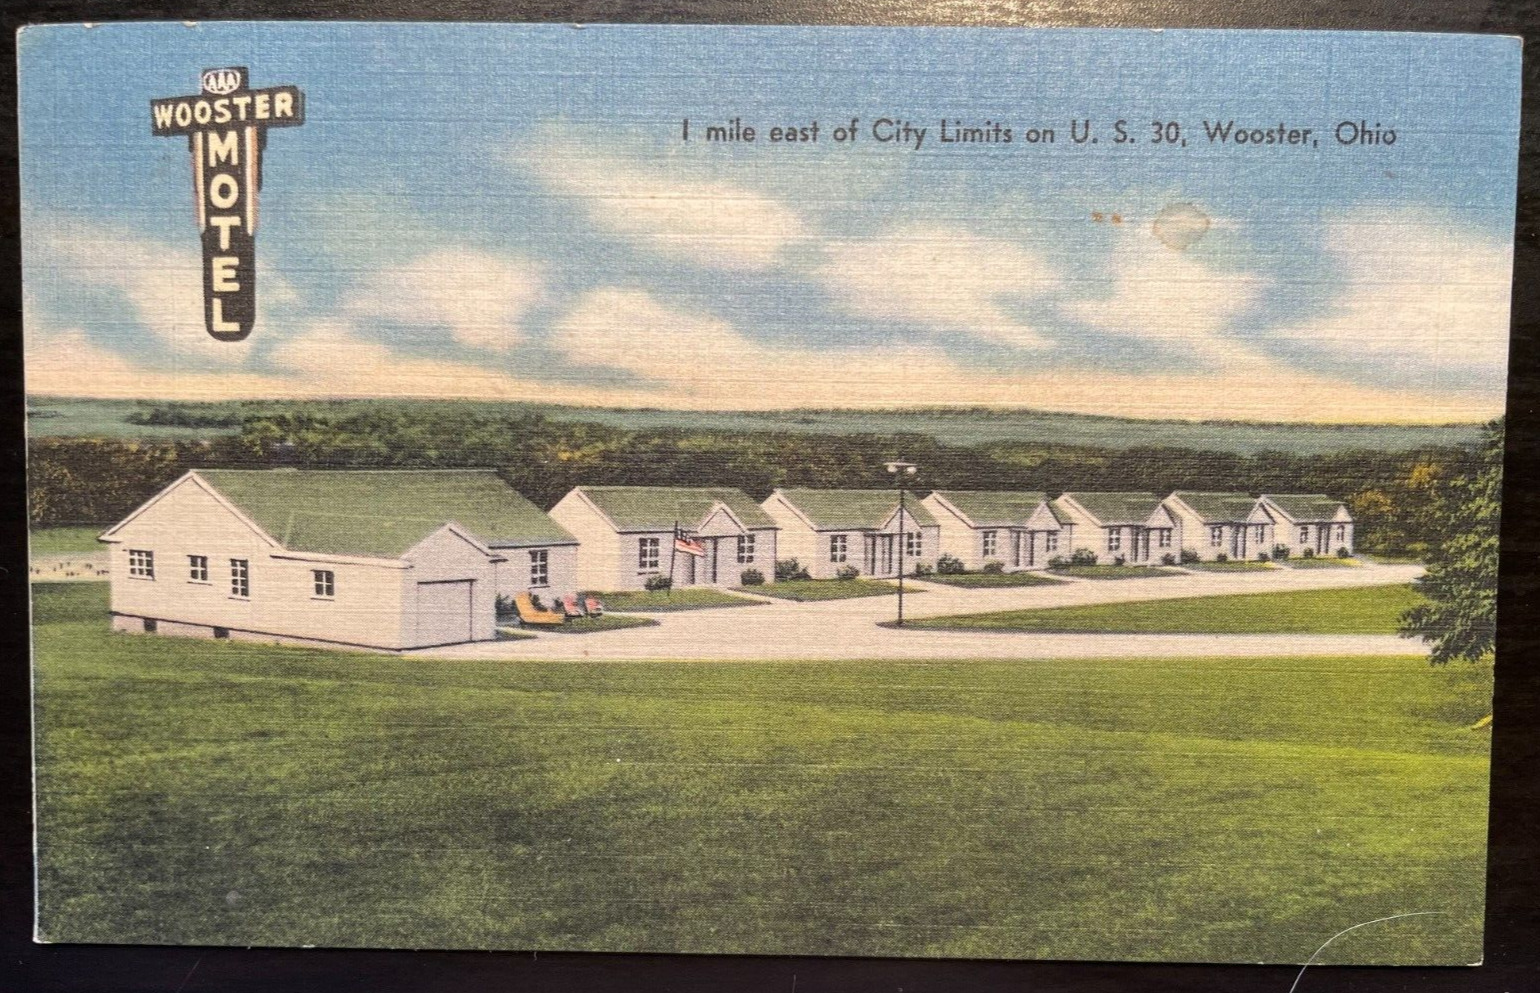 Vintage Postcard 1930-1945 The Wooster Motel, U.S. Route 30, Wooster, Ohio (OH)